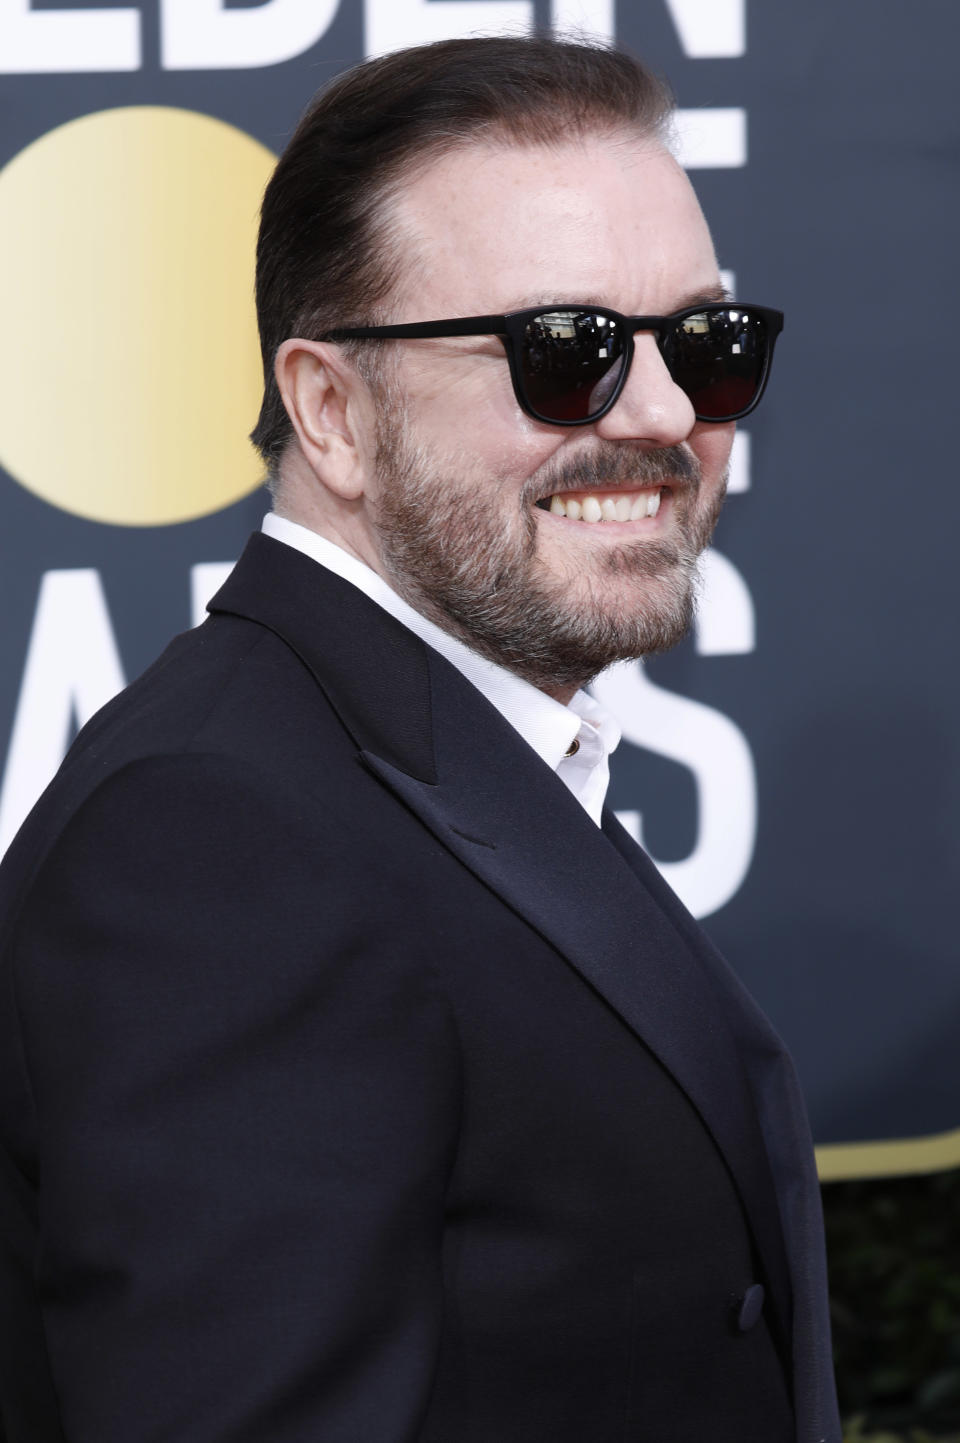 LOS ANGELES, CALIFORNIA, UNITED STATES - JANUARY 5, 2020 -                          Ricky Gervais photographed on the red carpet of the 77th Annual Golden Globe Awards at The Beverly Hilton Hotel on January 05, 2020 in Beverly Hills, California.- PHOTOGRAPH BY P. Lehman / Barcroft Media (Photo credit should read P. Lehman / Barcroft Media via Getty Images)